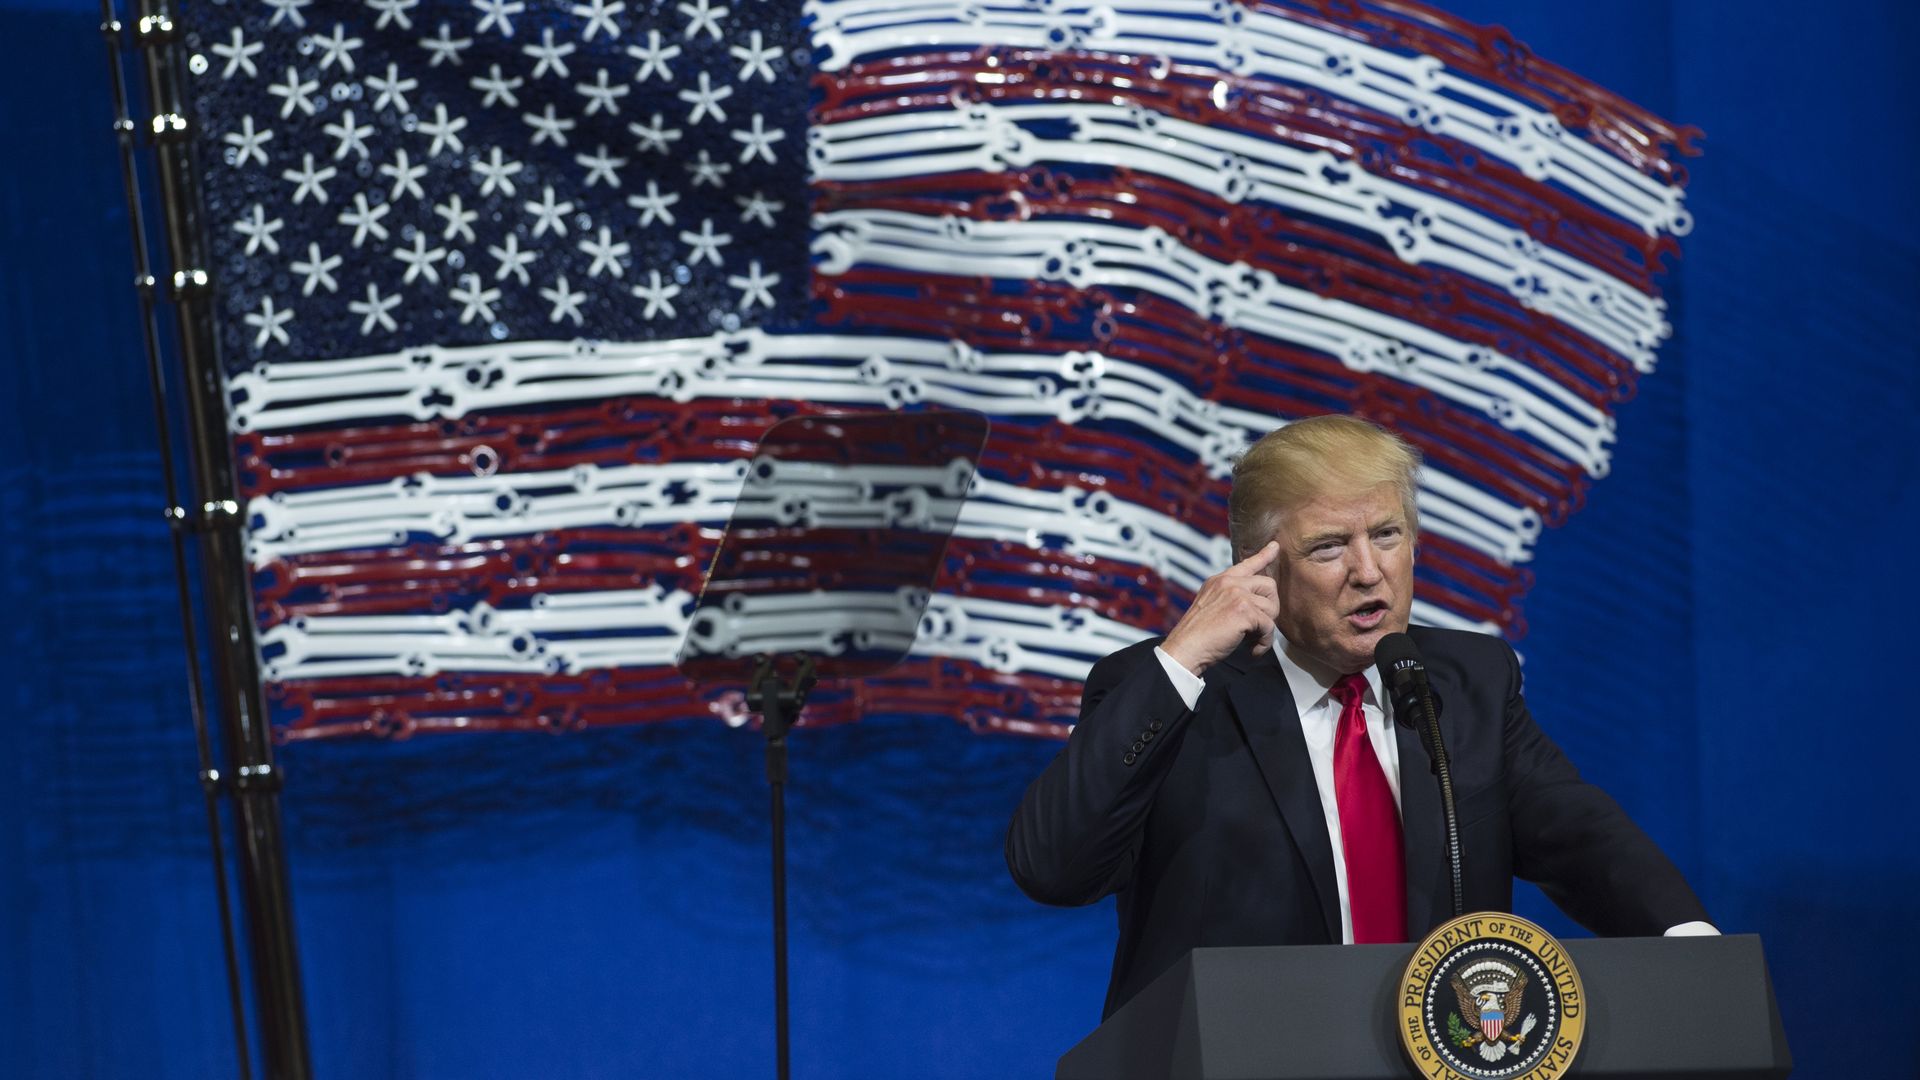 Trump in front of an American flag made of tools before he signed the Buy American, Hire American executive order. HIs index finger is pointing toward his head and he's speaking at a podium. 